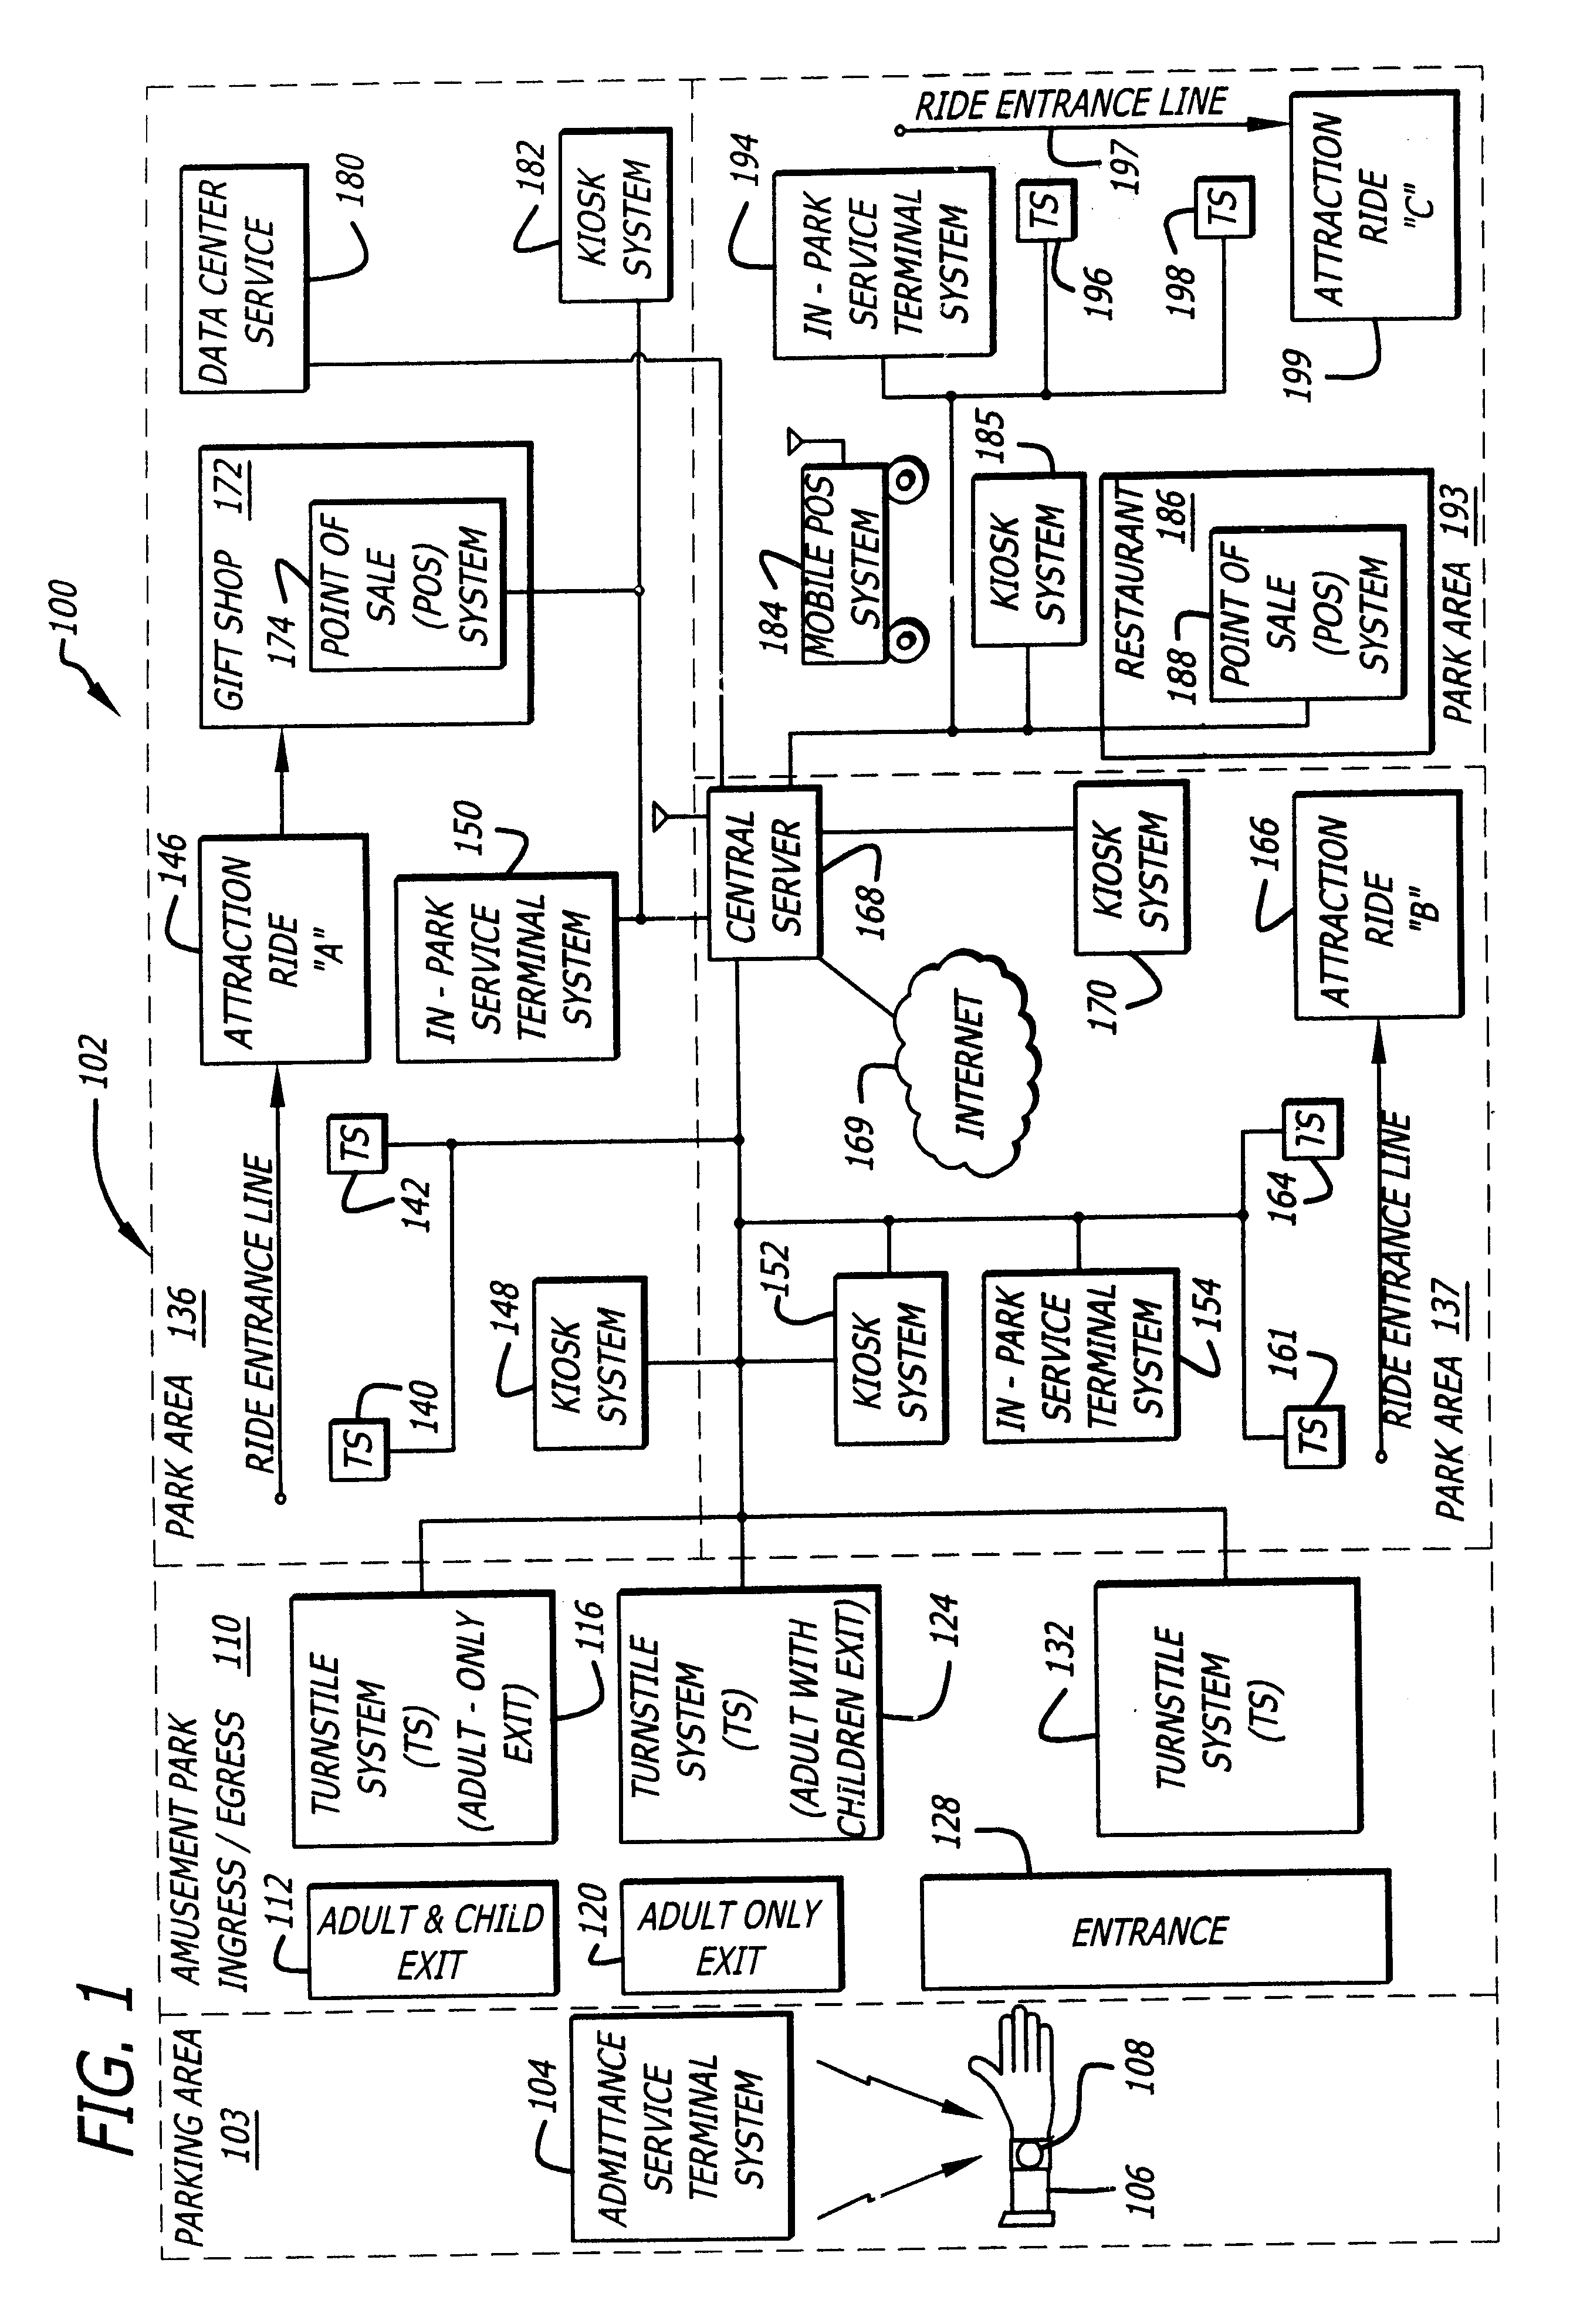 System and method for selectively allowing the passage of a guest through a region within a coverage area